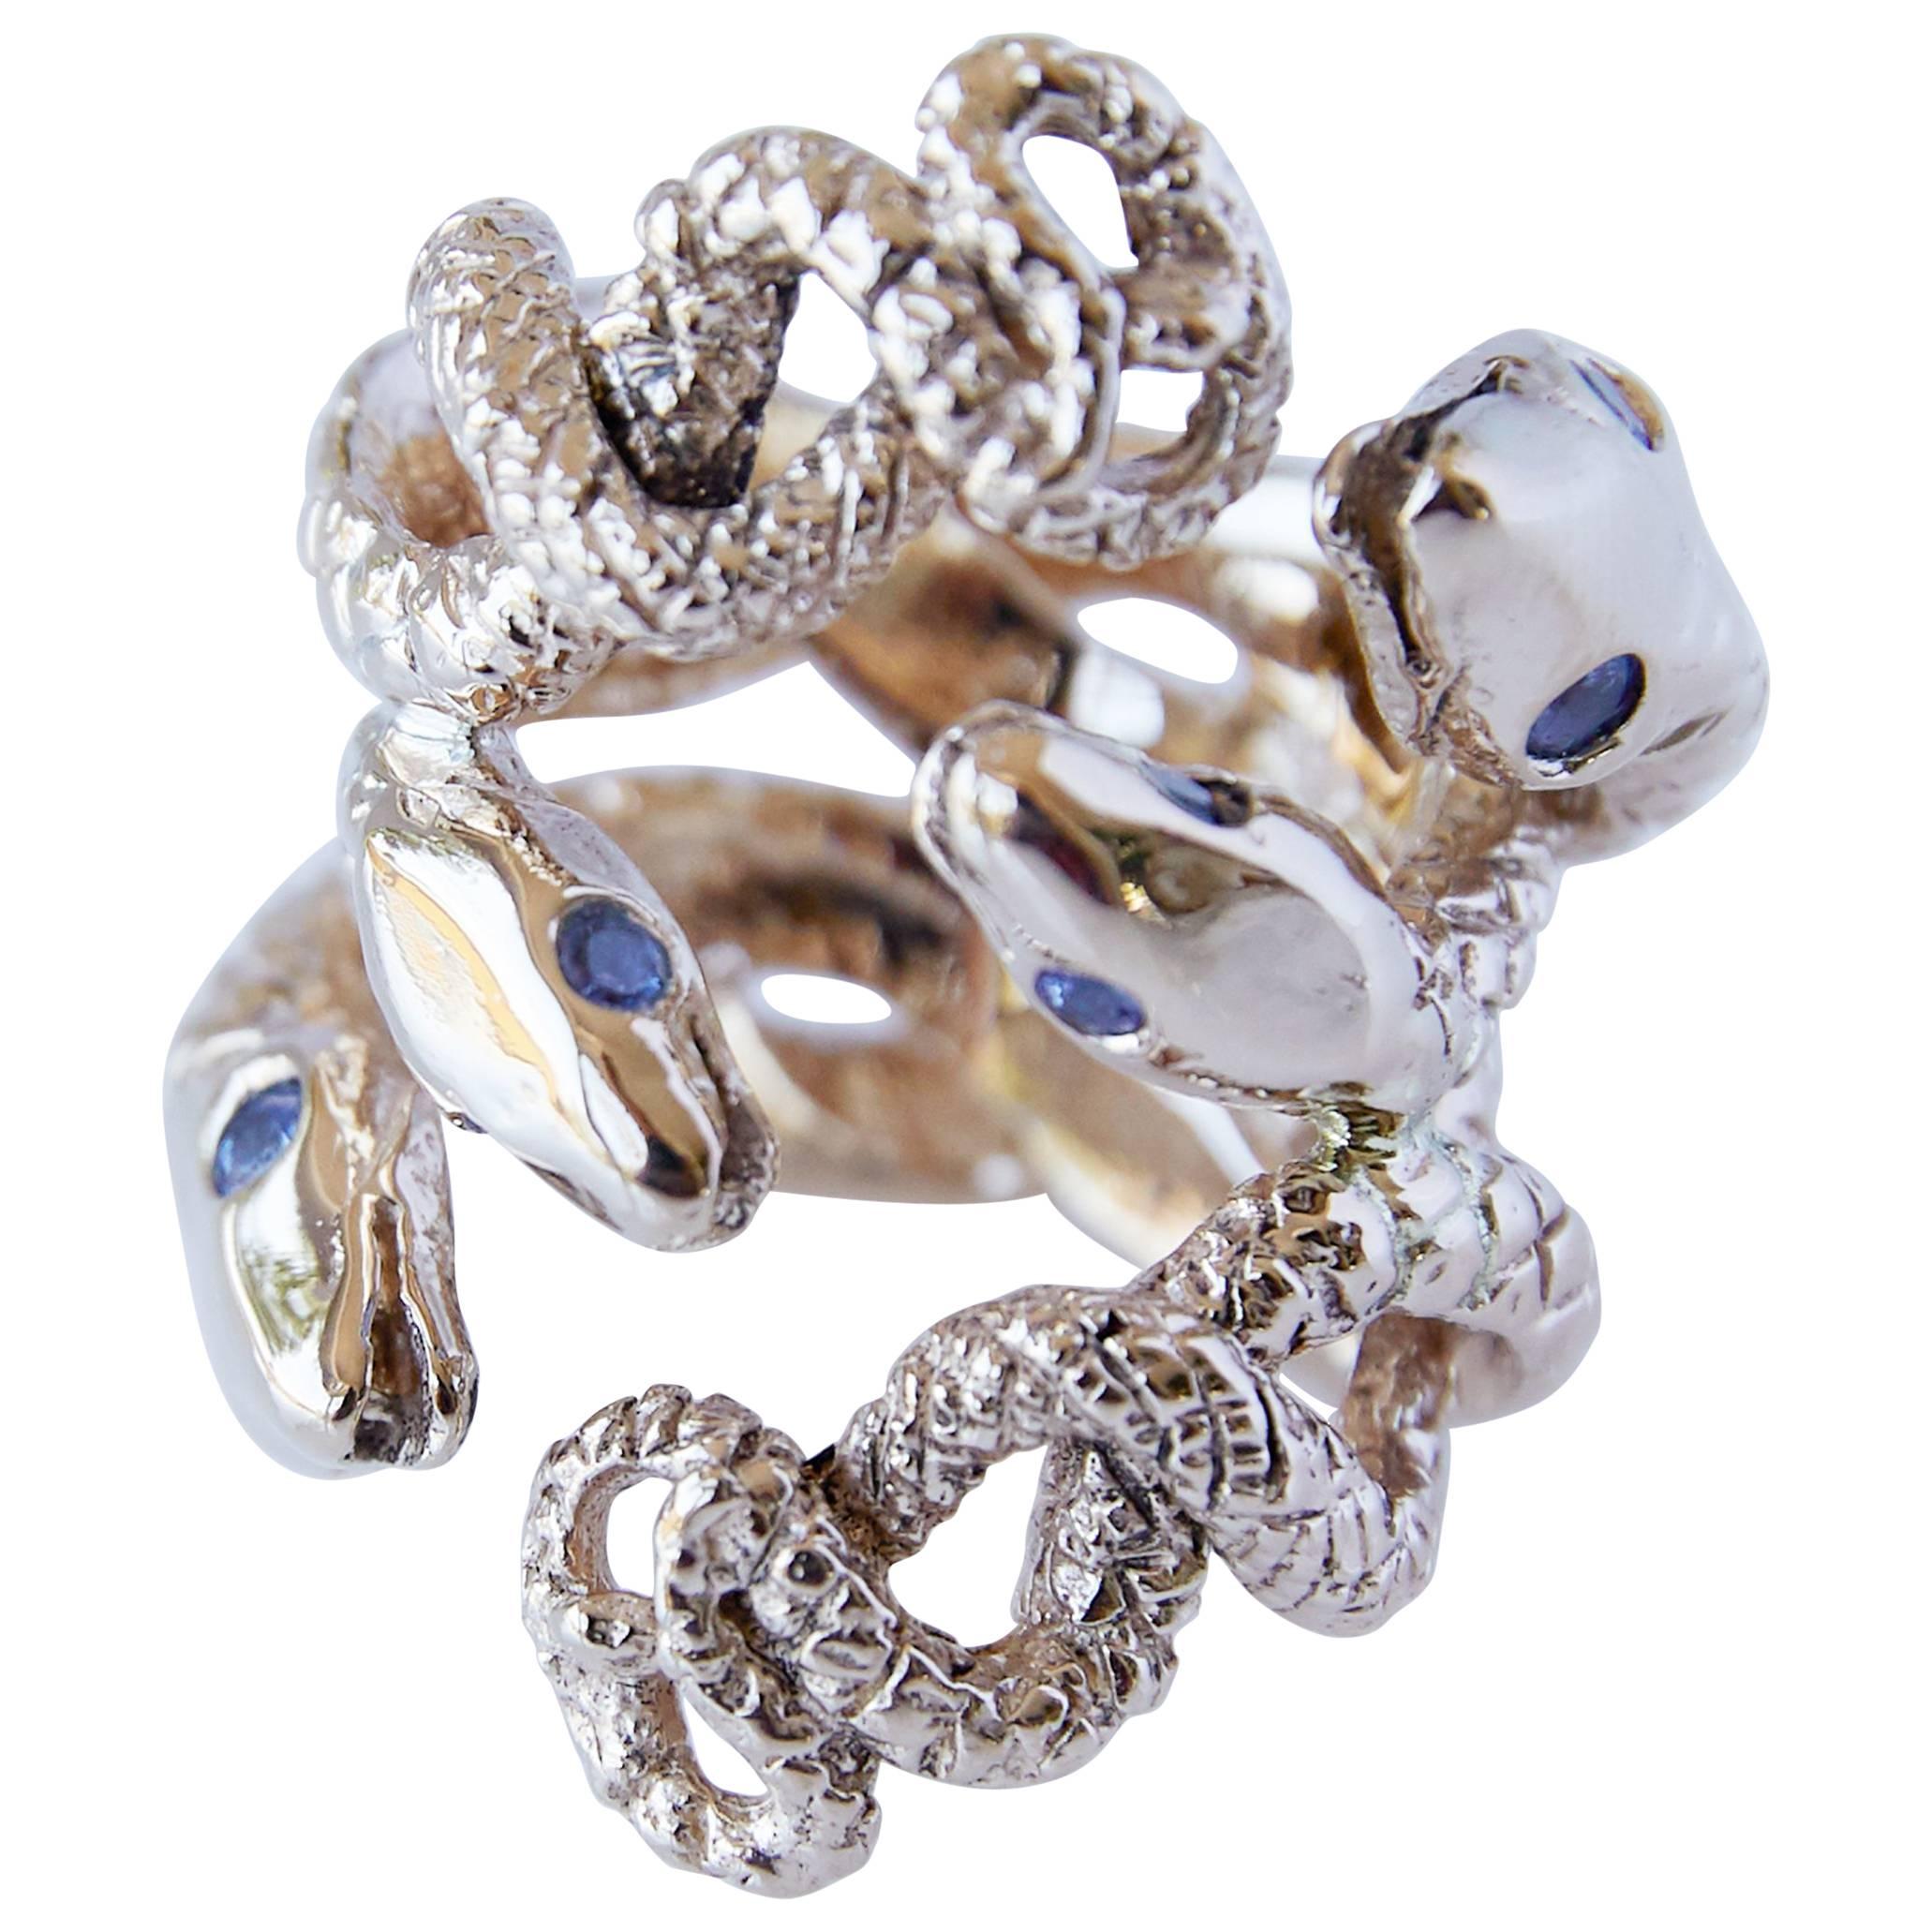 Brilliant Cut Tanzanite Snake Ring Gold Cocktail Ring Adjustable J Dauphin For Sale